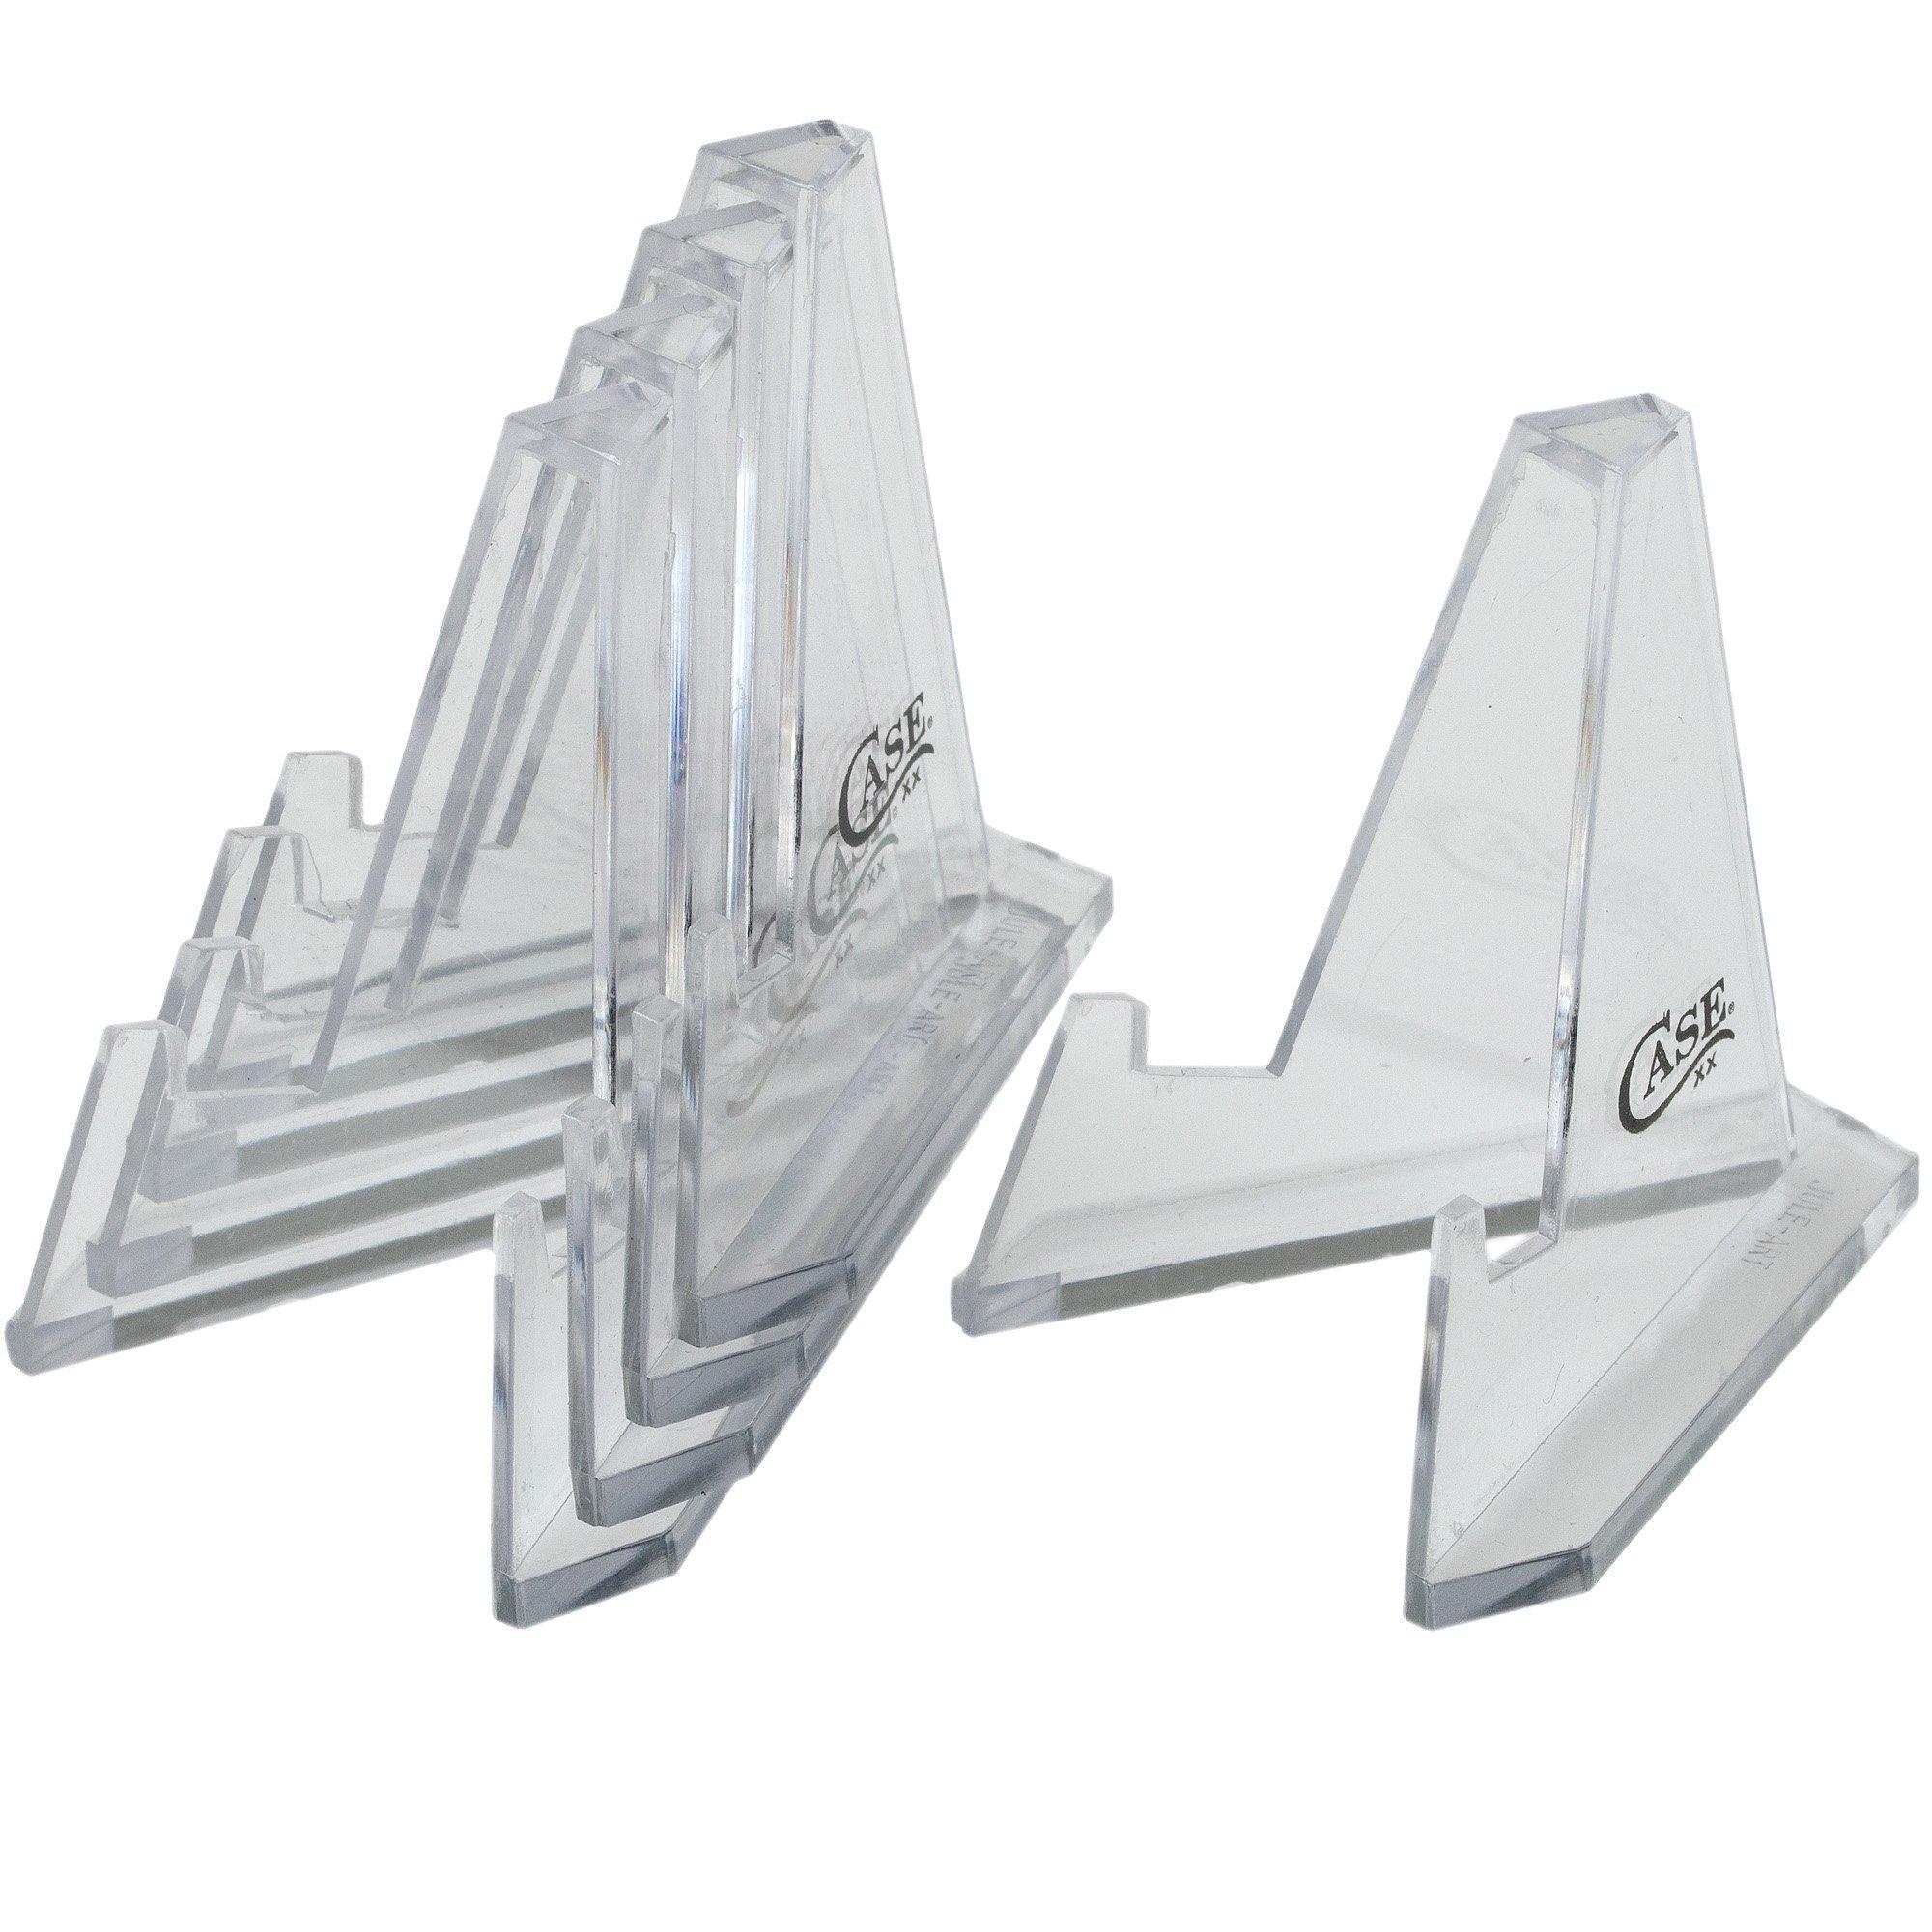 Case Knives Case Knives Acrylic Knife Stand Medium 09063 5x messenstandaard